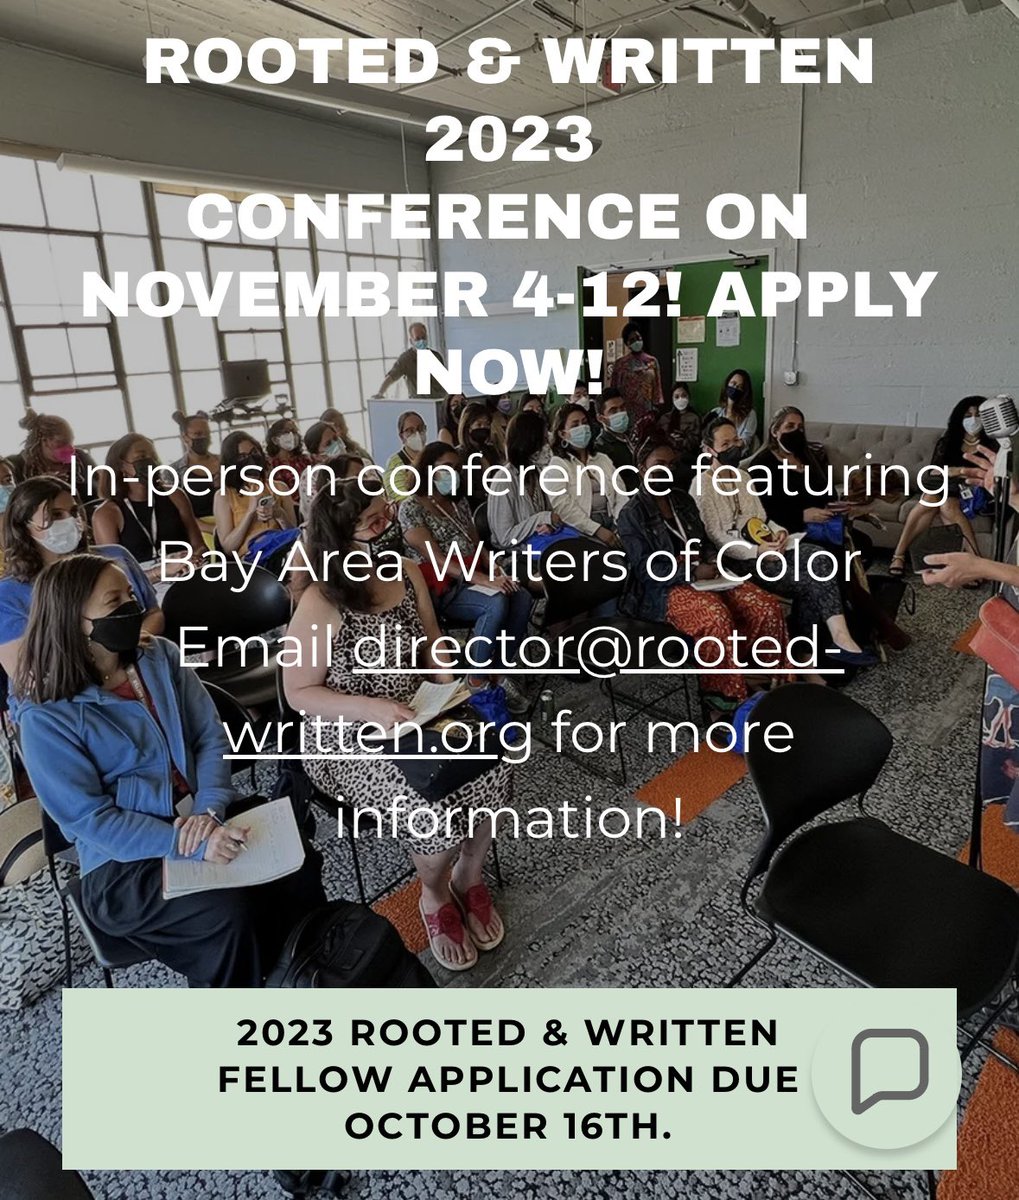 WRITERS OF COLOR: Applications are now open for Rooted and Written, a fully-funded writers conference by and for writers of color at @sfgrotto in San Francisco from Nov. 4-12. I’ll be teaching creative nonfiction. 🙌🏽 Applications due Oct. 16! Details: rooted-written.org